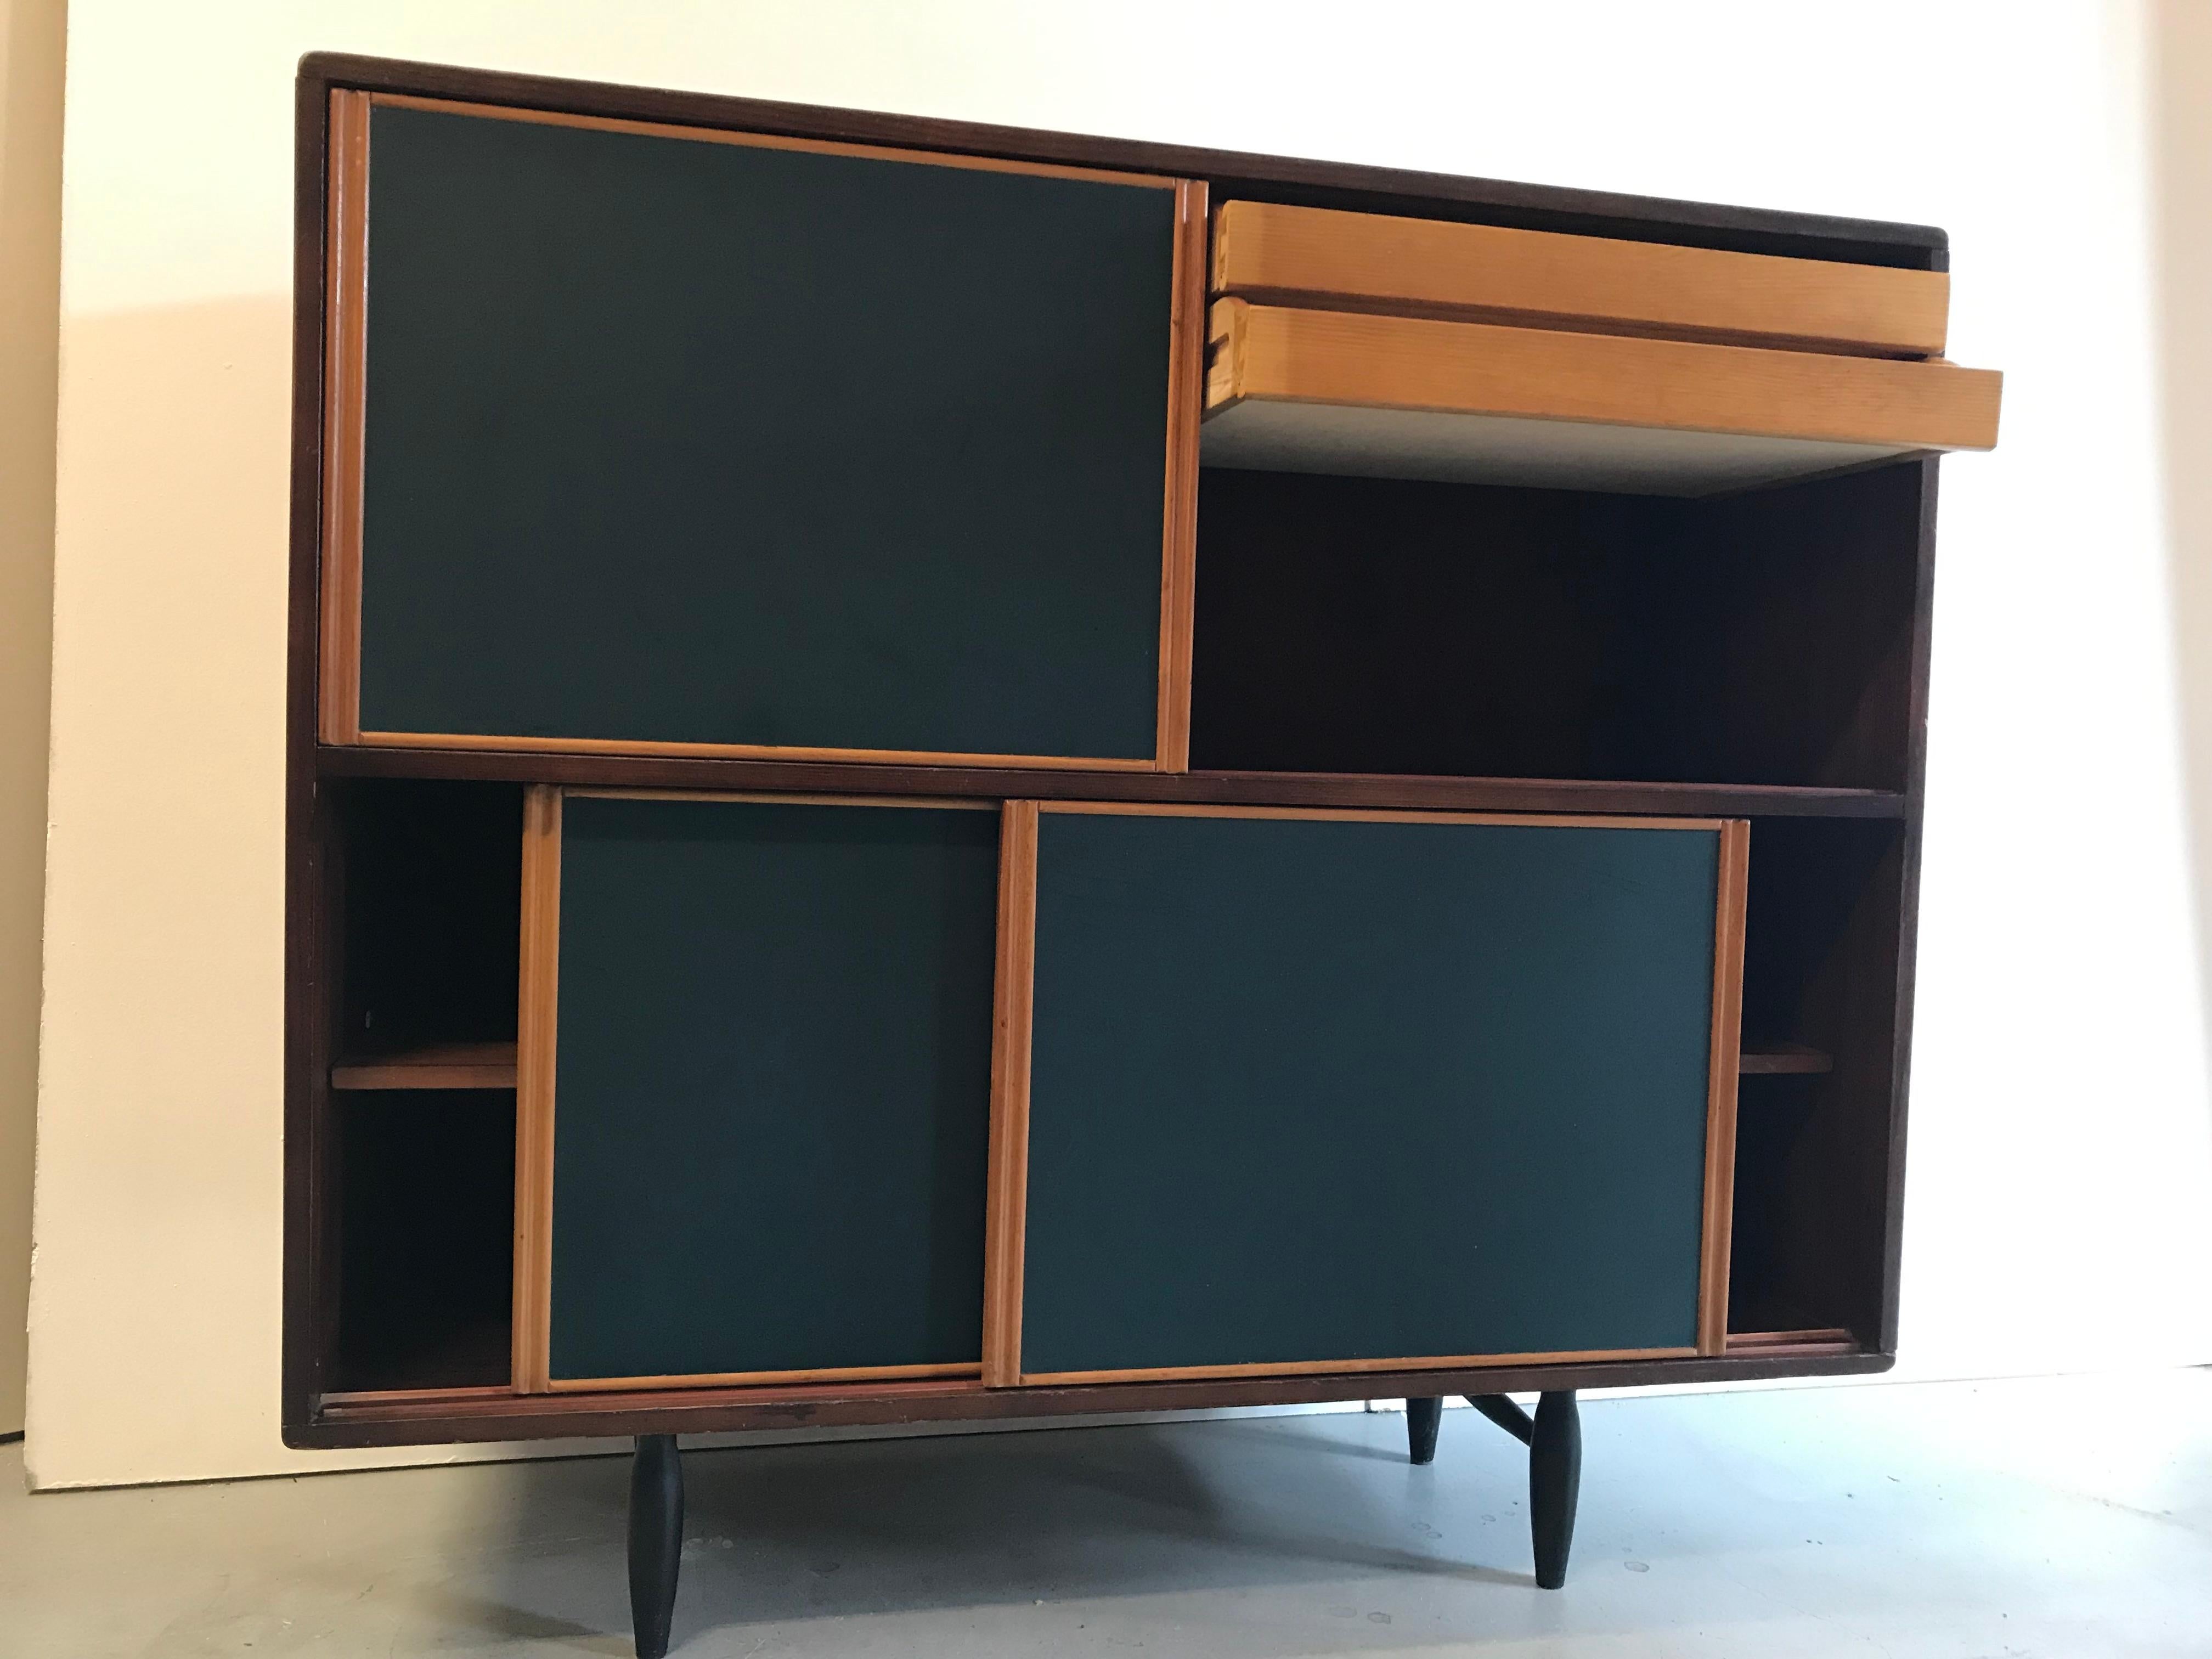 Sideboard from designer Ilmari Tapiovaara for Laukaan Puu. Finland 1950s.
Sideboard ‘Pirkka’ is a handsome sized cabinet with four doors and inside shelves.
Stands on four solid feet. Pine edition with pretty blue colored, original, doors.